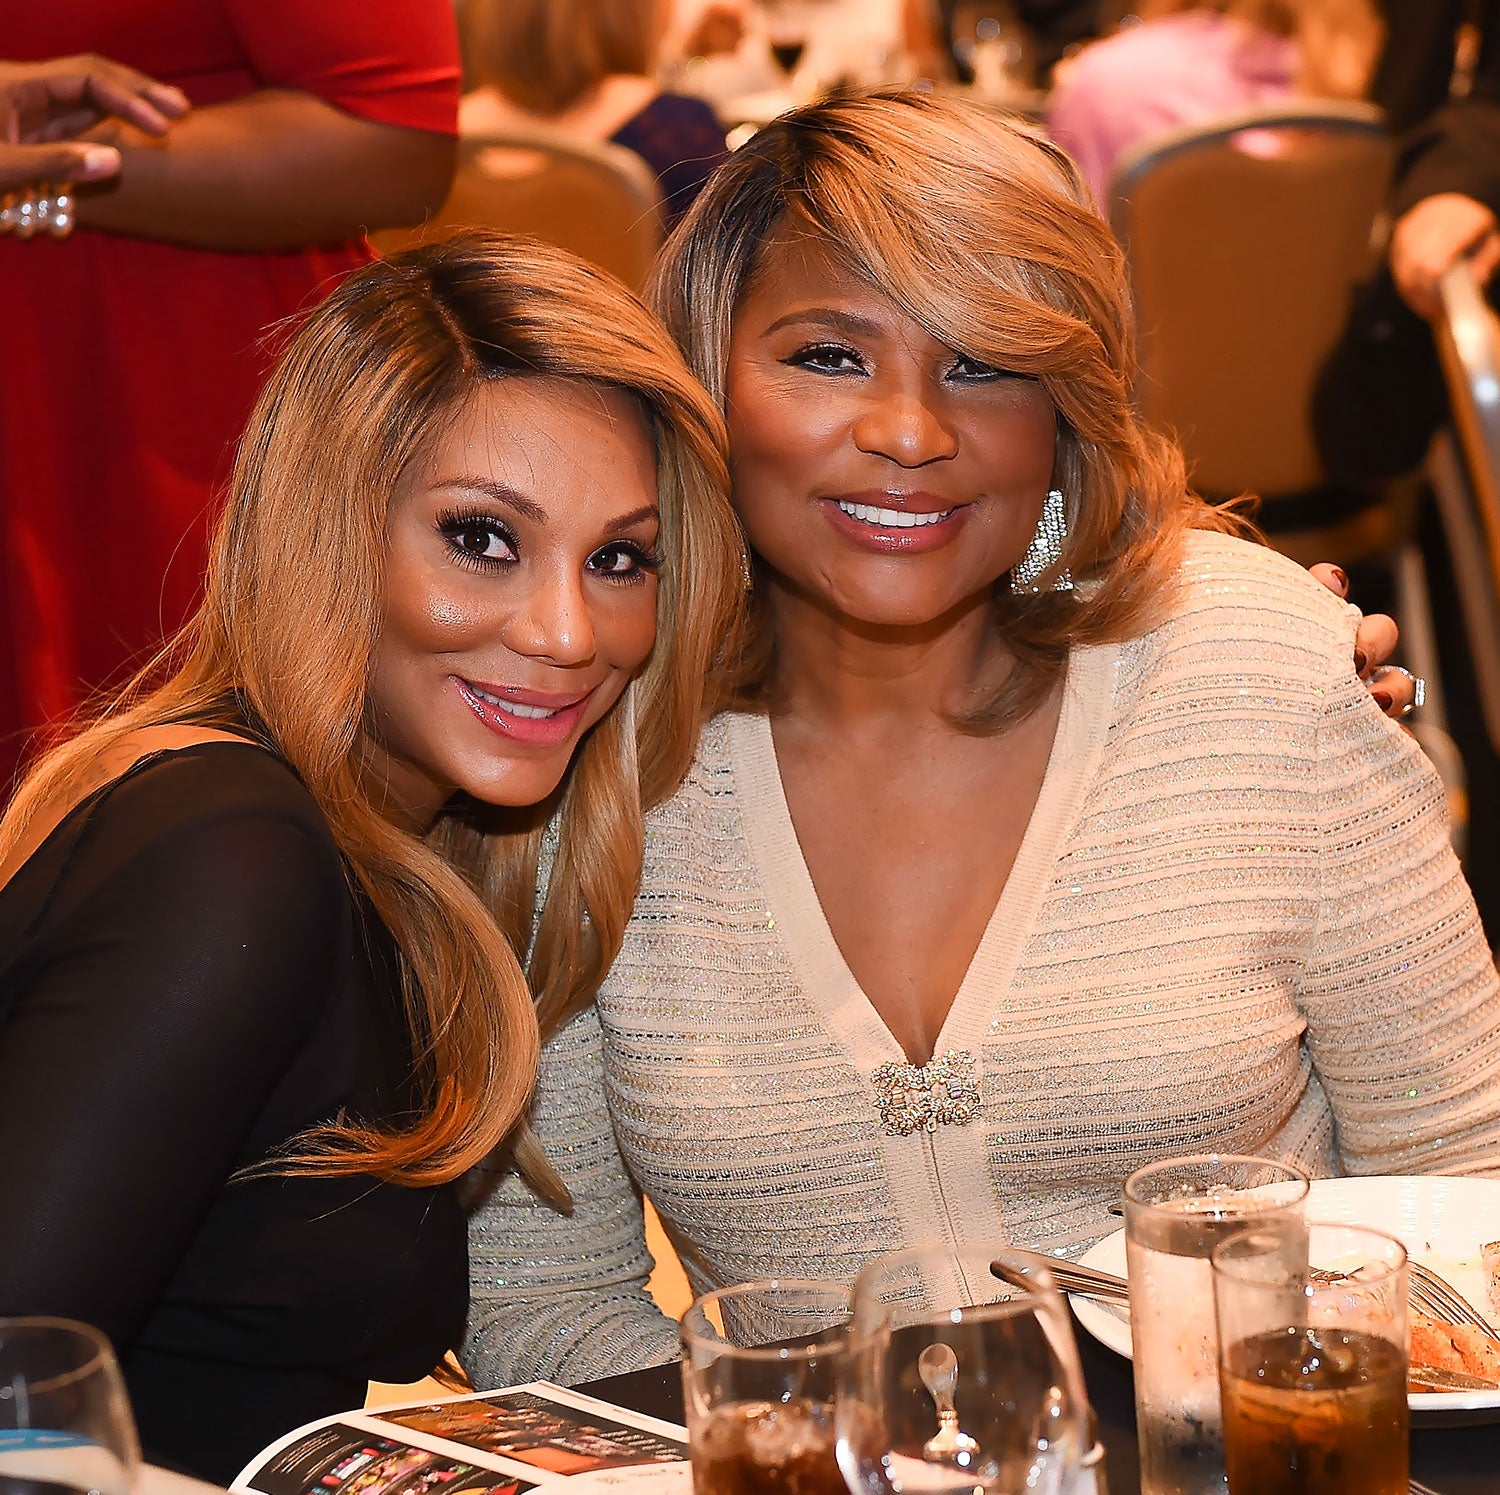 EXCLUSIVE: Is Mama Braxton Still Struggling With Her Ex-Husband’s Infidelity?
